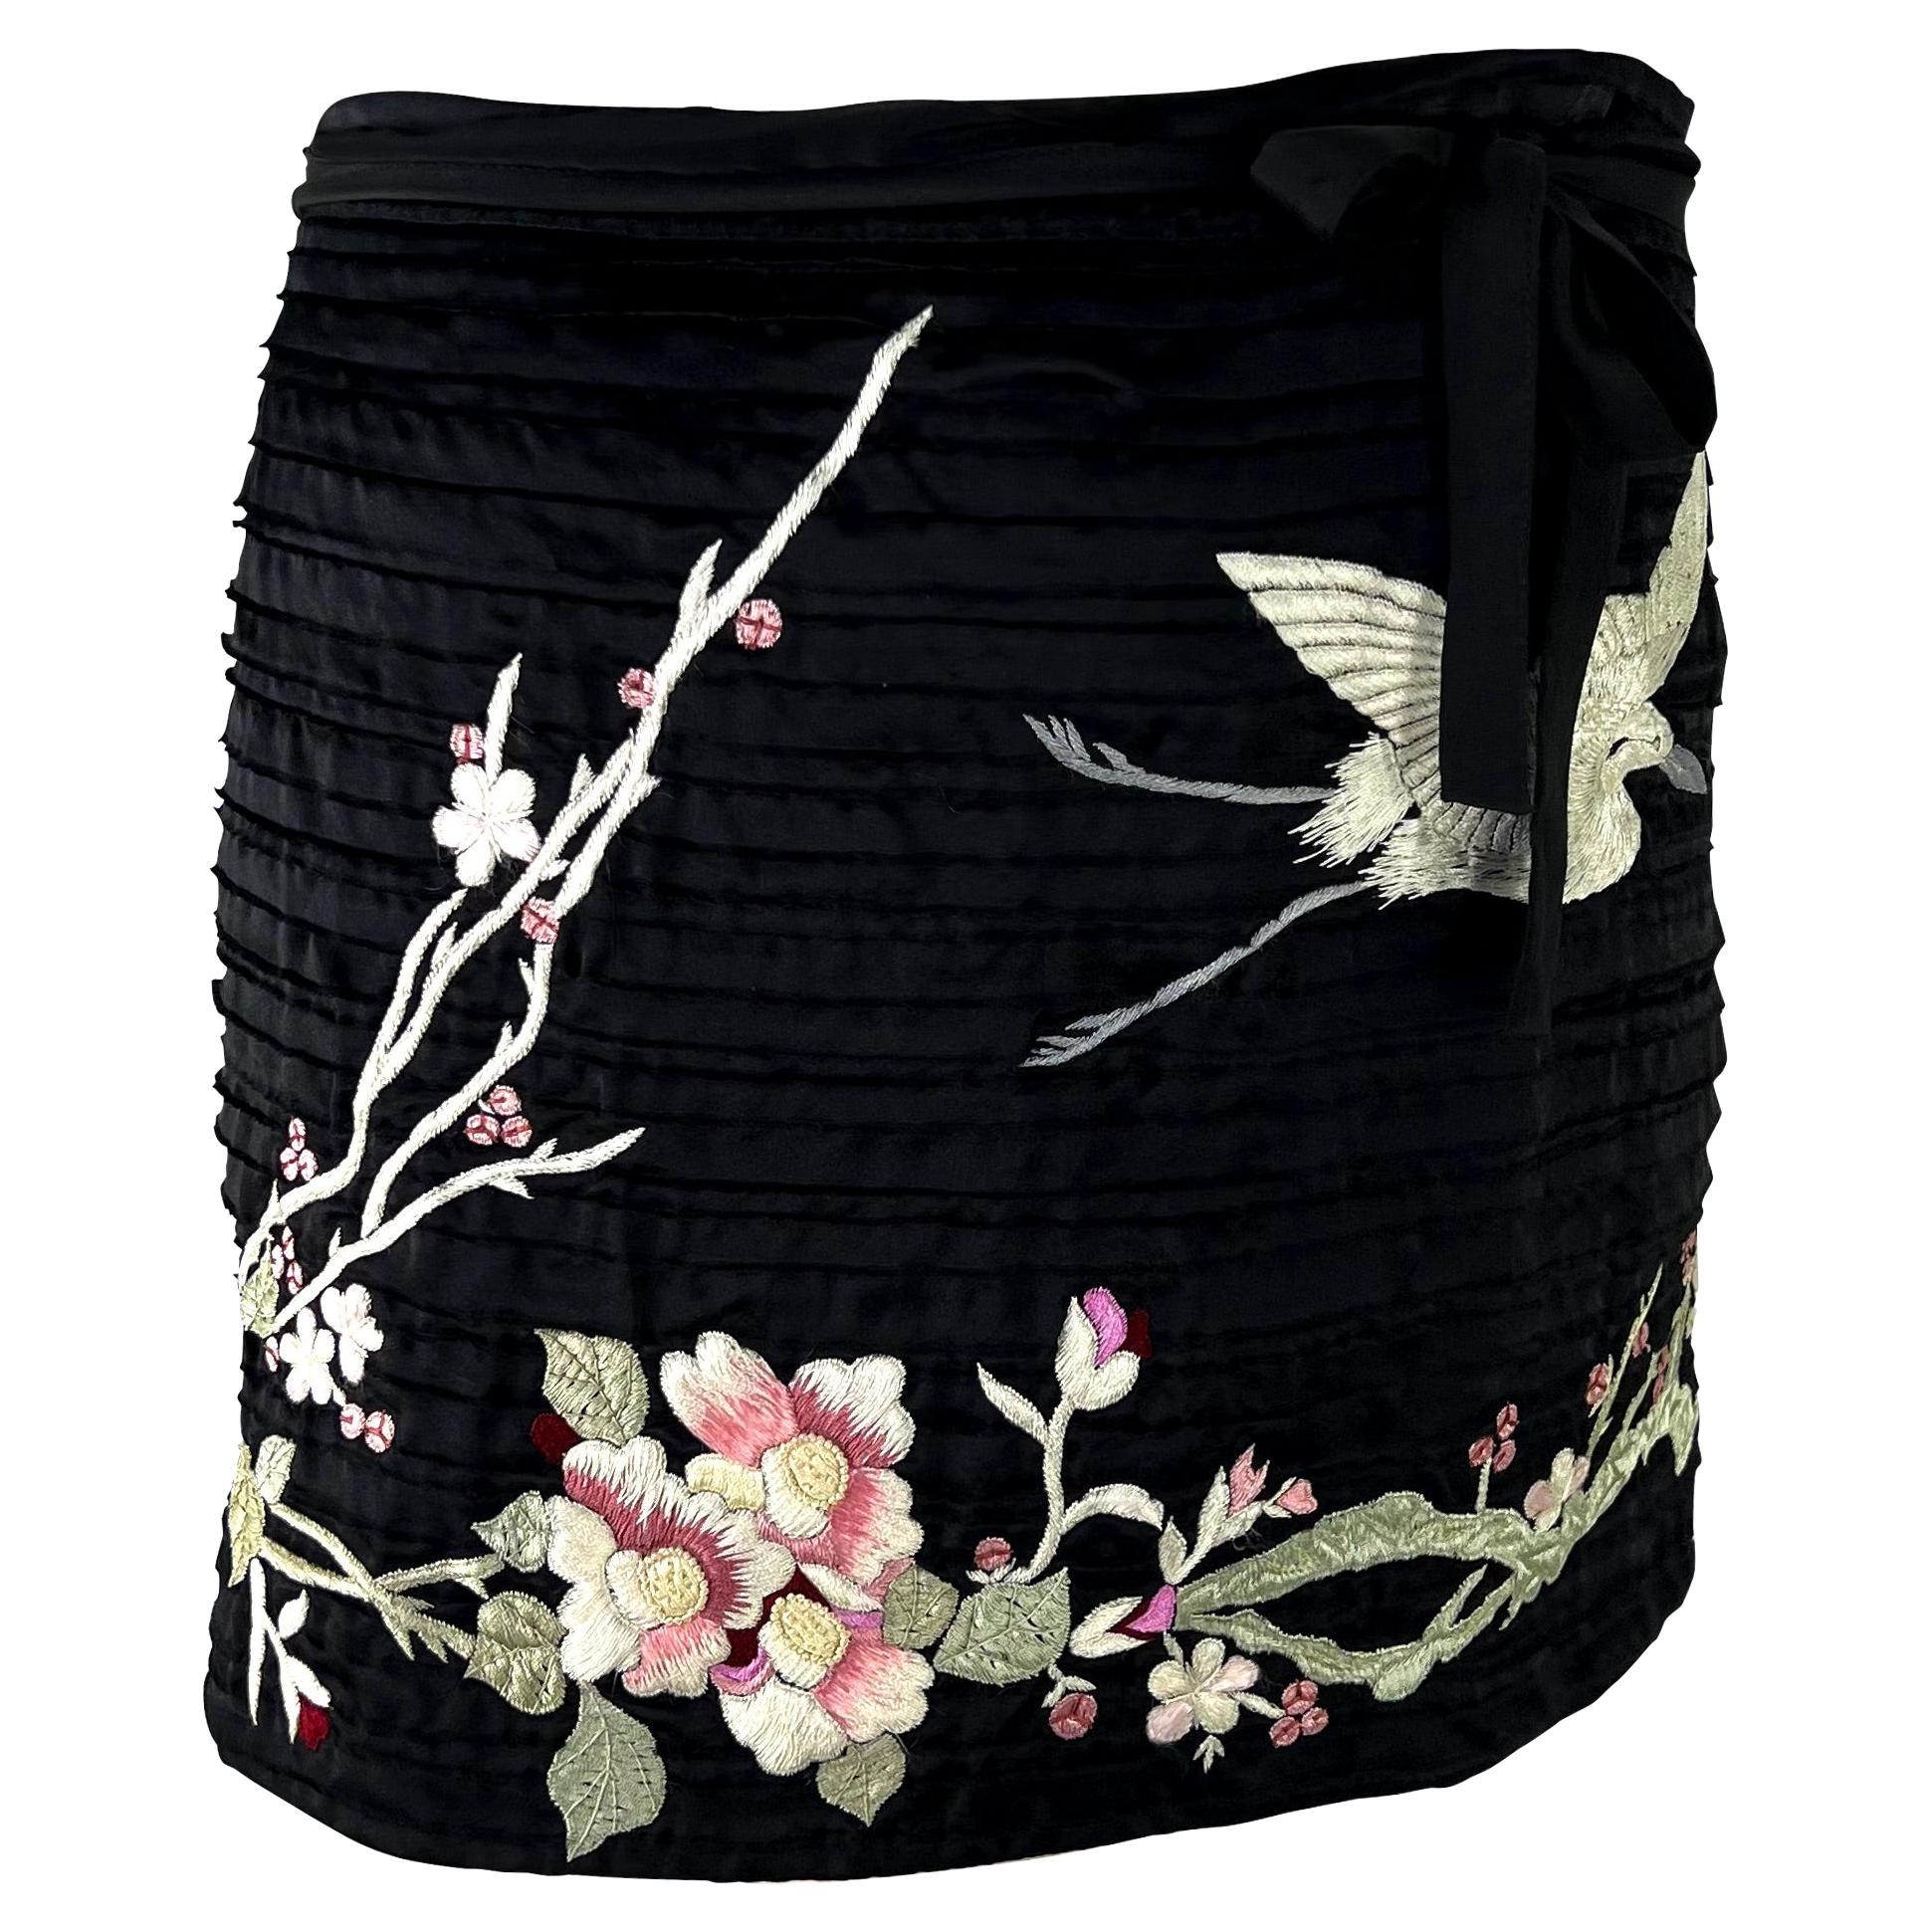 Black S/S 2003 Gucci by Tom Ford Japanese Cherry Blossom Embroidered Mini Wrap Skirt